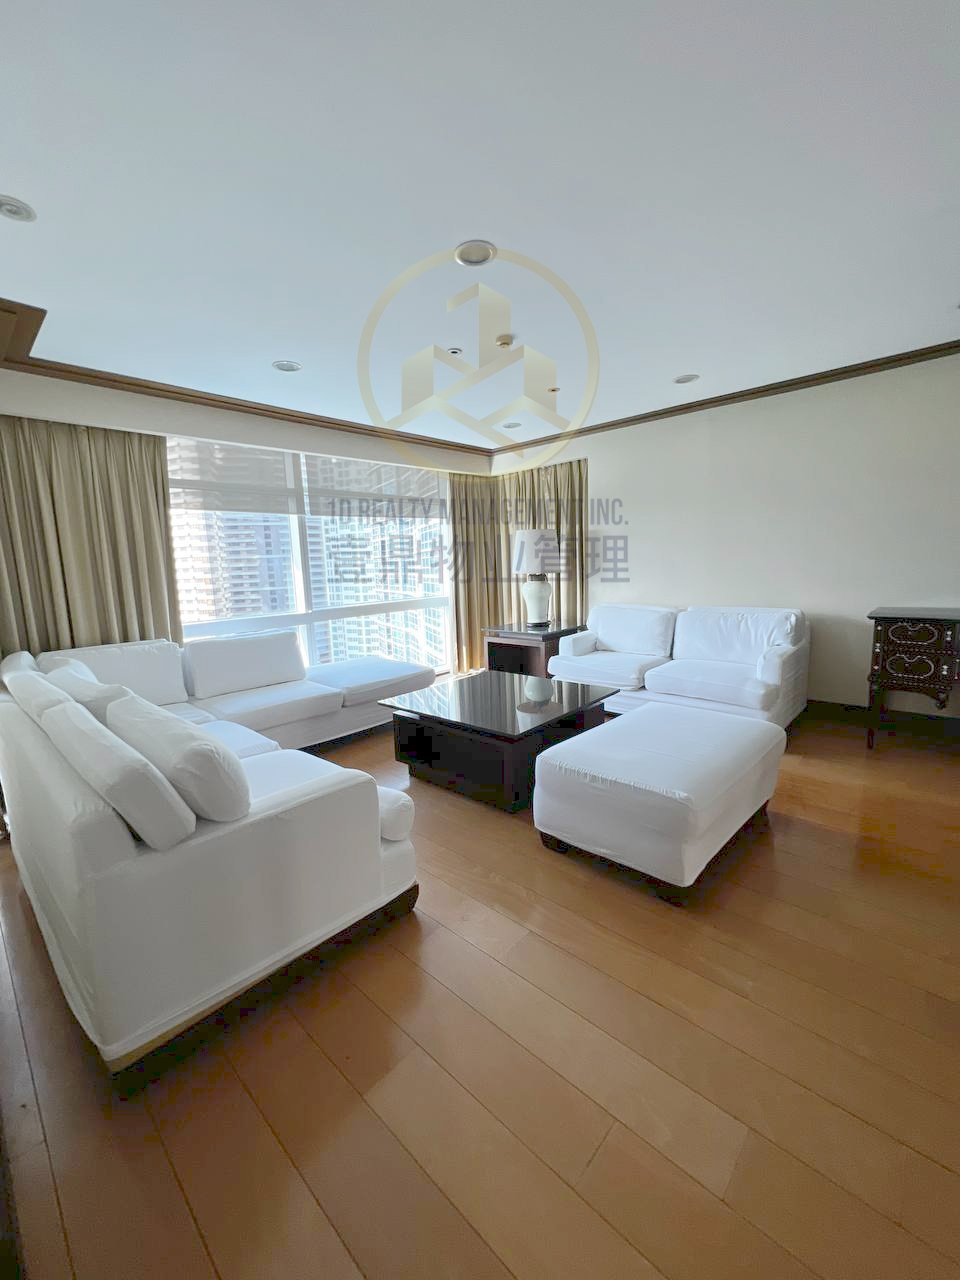 FOR LEASE 3BR - Pacific Plaza Towers - West, Crescent Park Residences, 4th Ave, Taguig